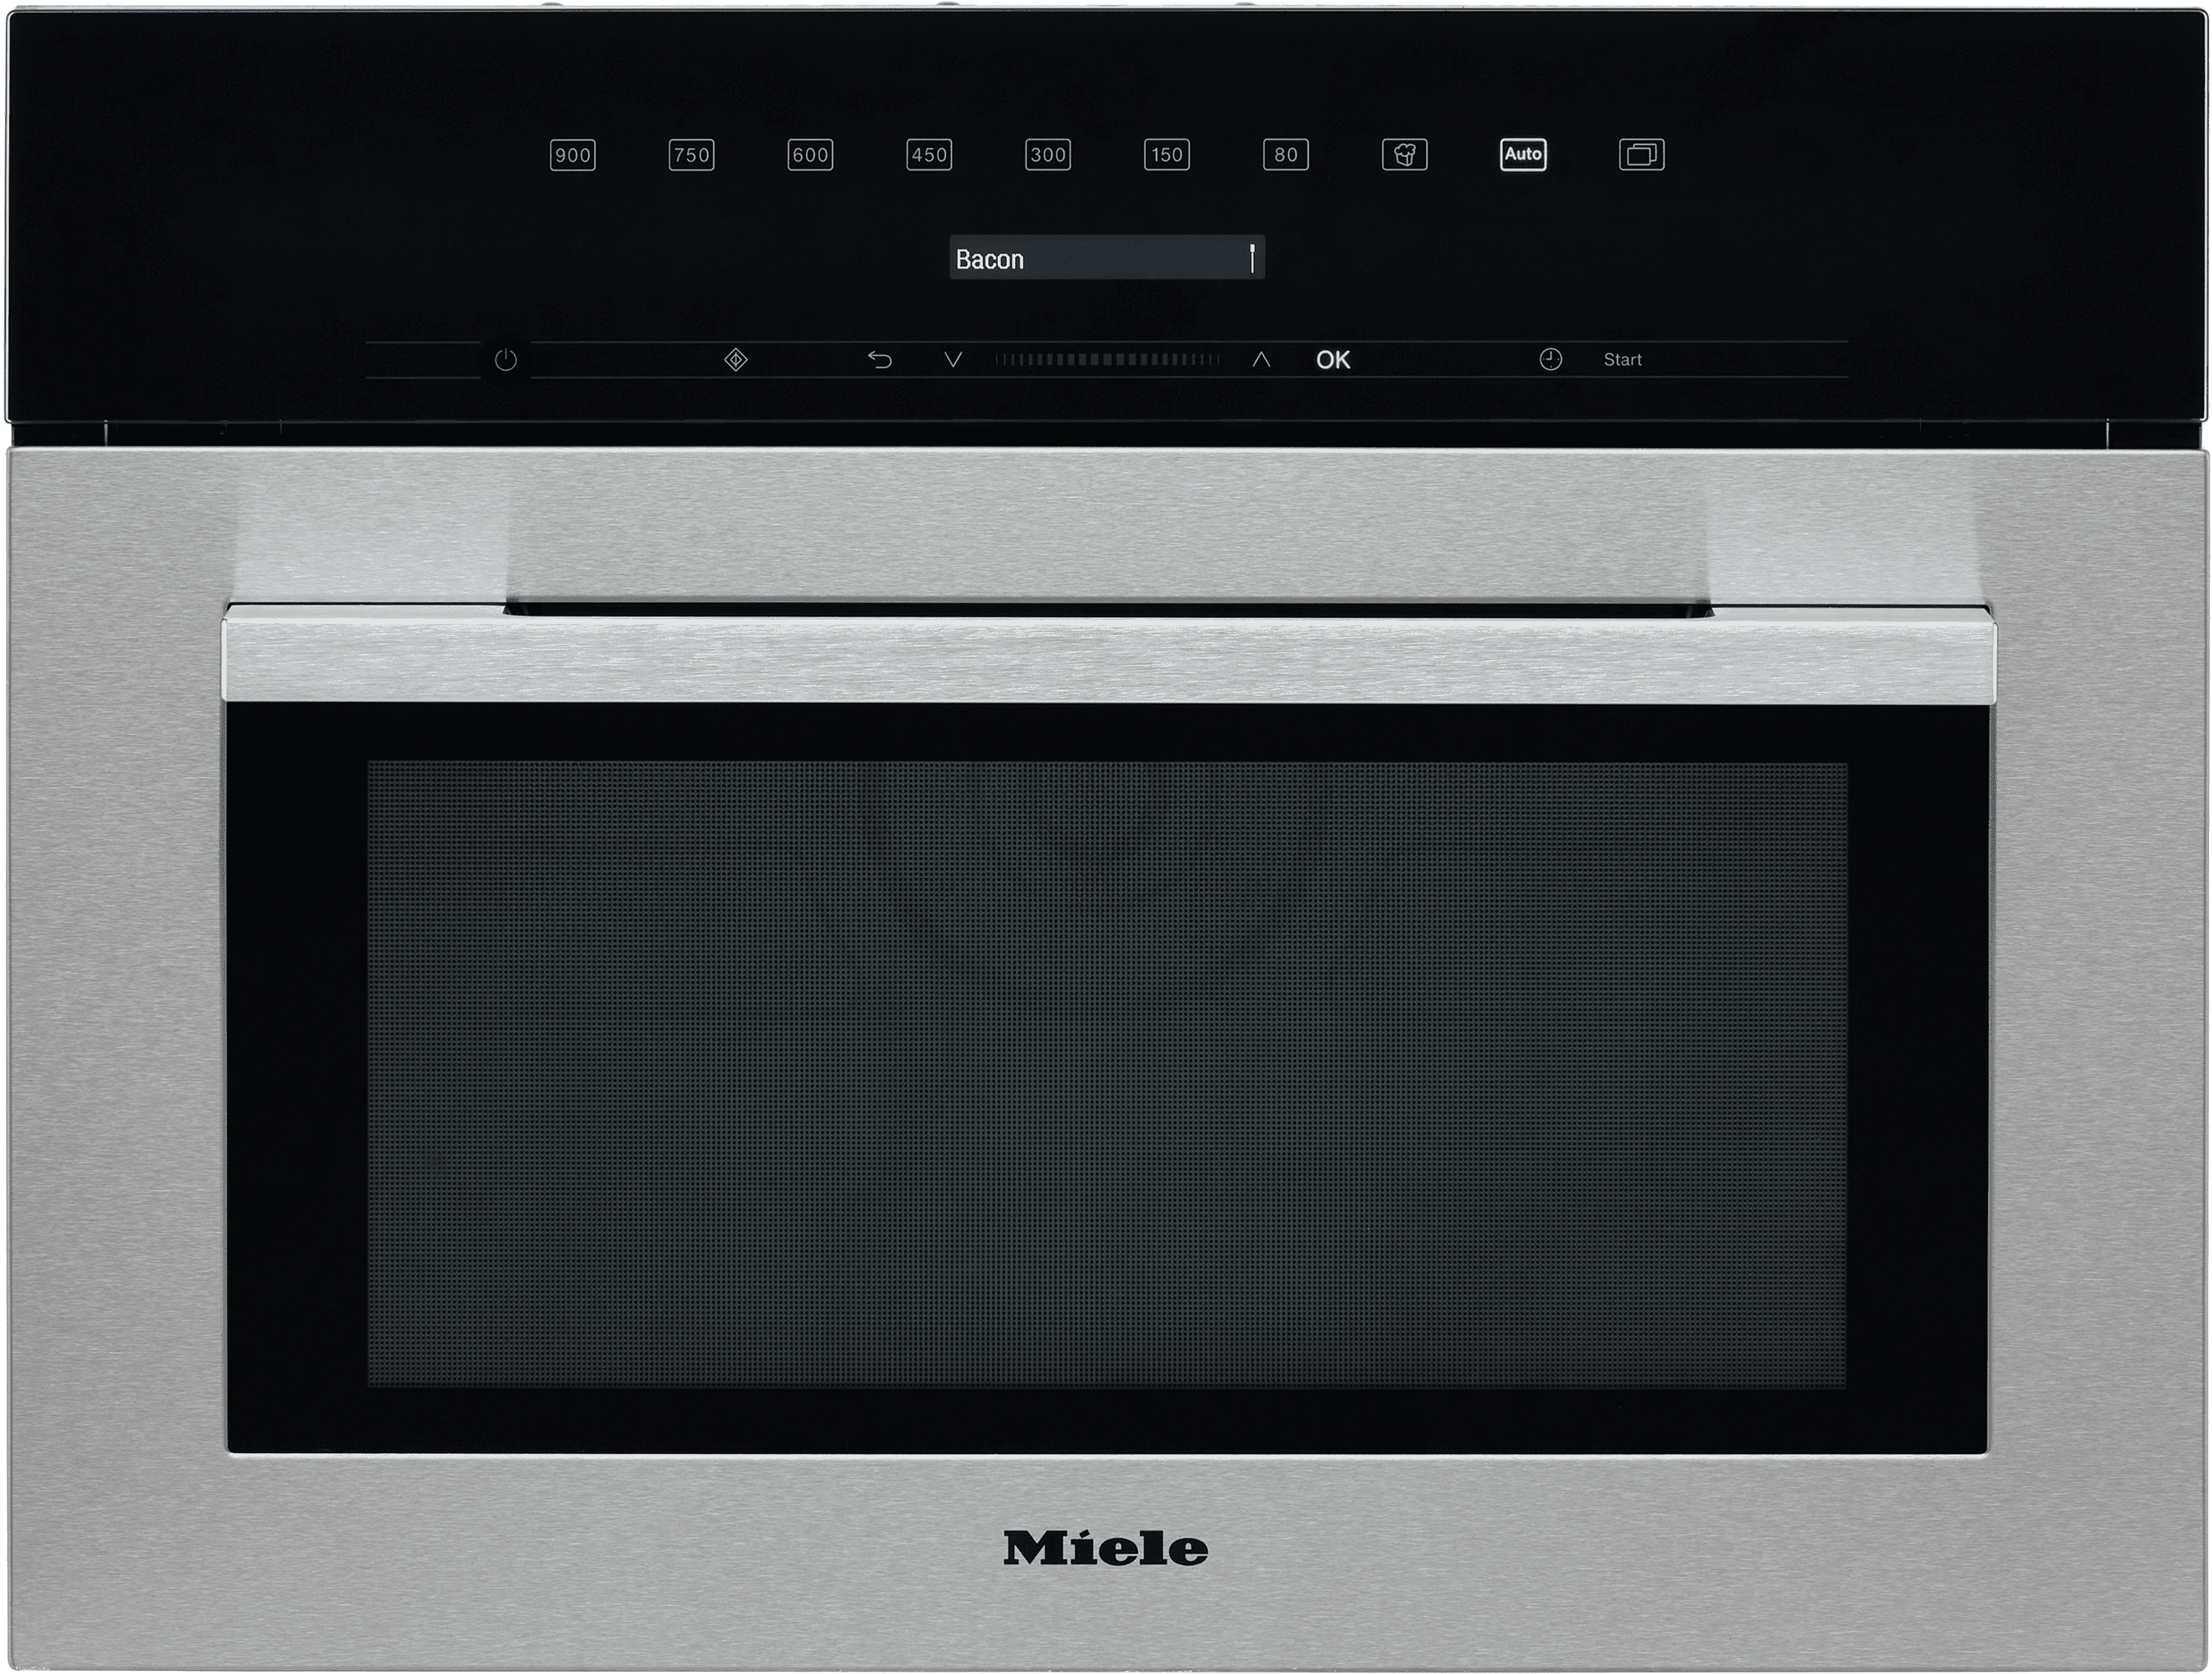 Miele M7140TC Built In 45cm Tall Microwave - Clean Steel, Stainless Steel